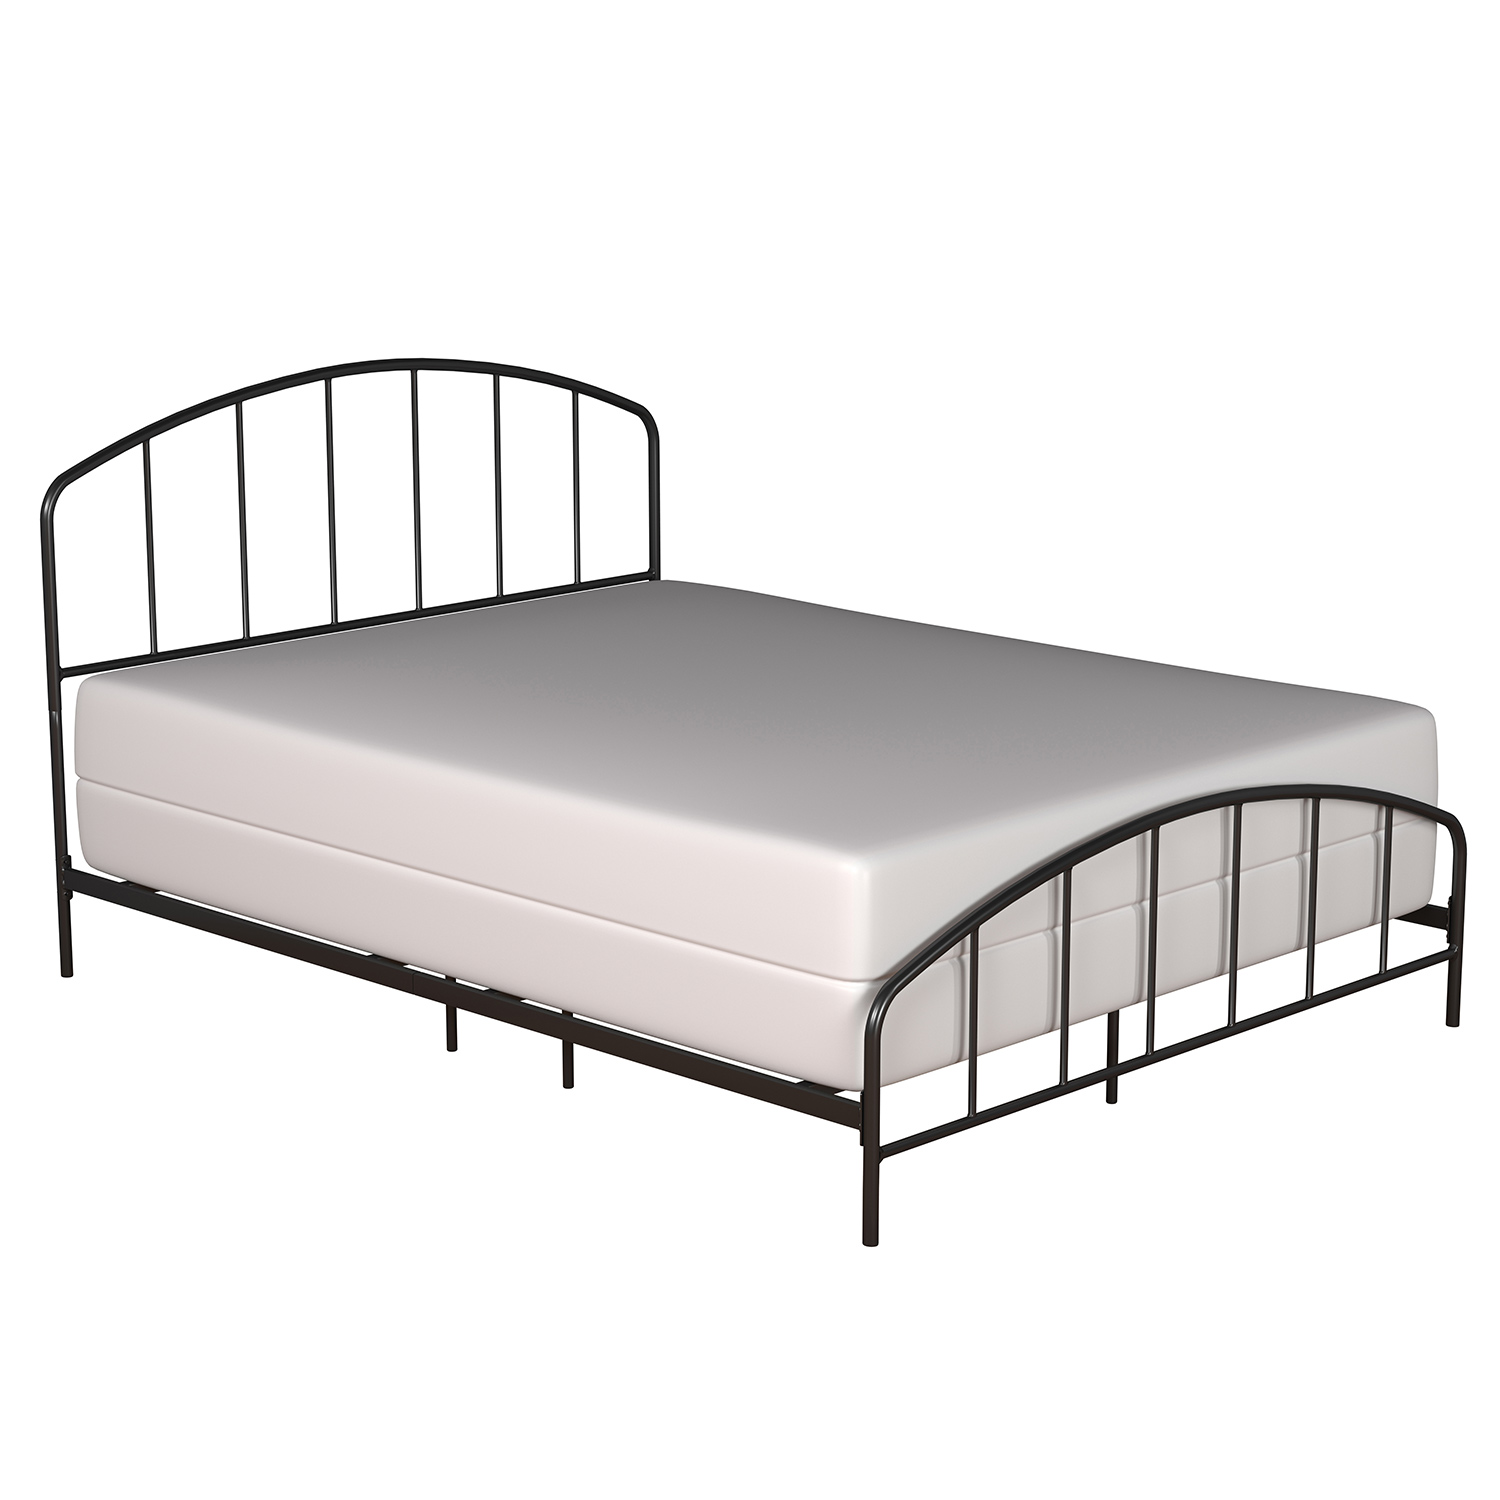 Hillsdale Tolland Metal Bed with Arched Spindle Design - Black